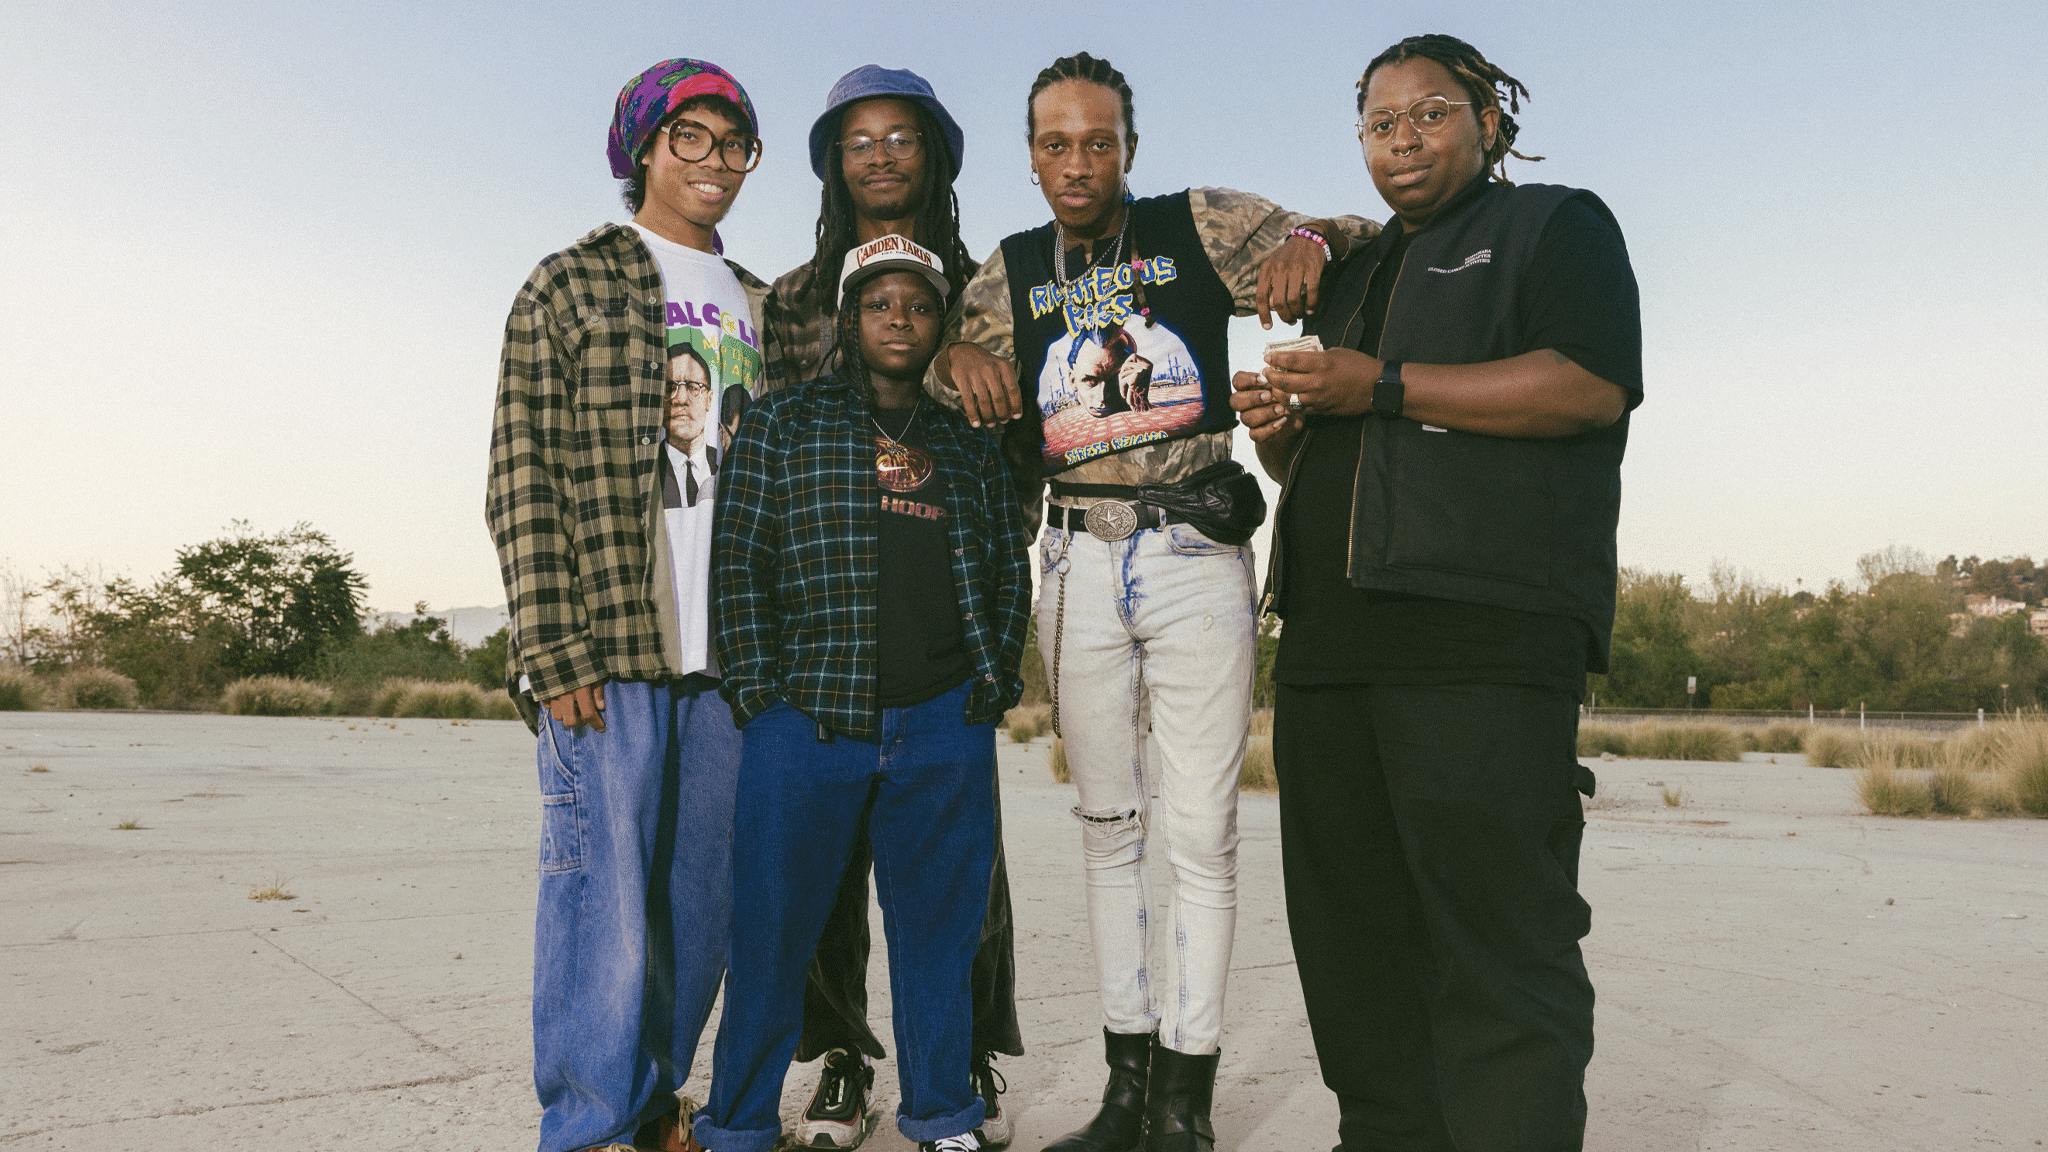 Watch ZULU’s new video for Where I’m From, featuring Eric Andre cameo